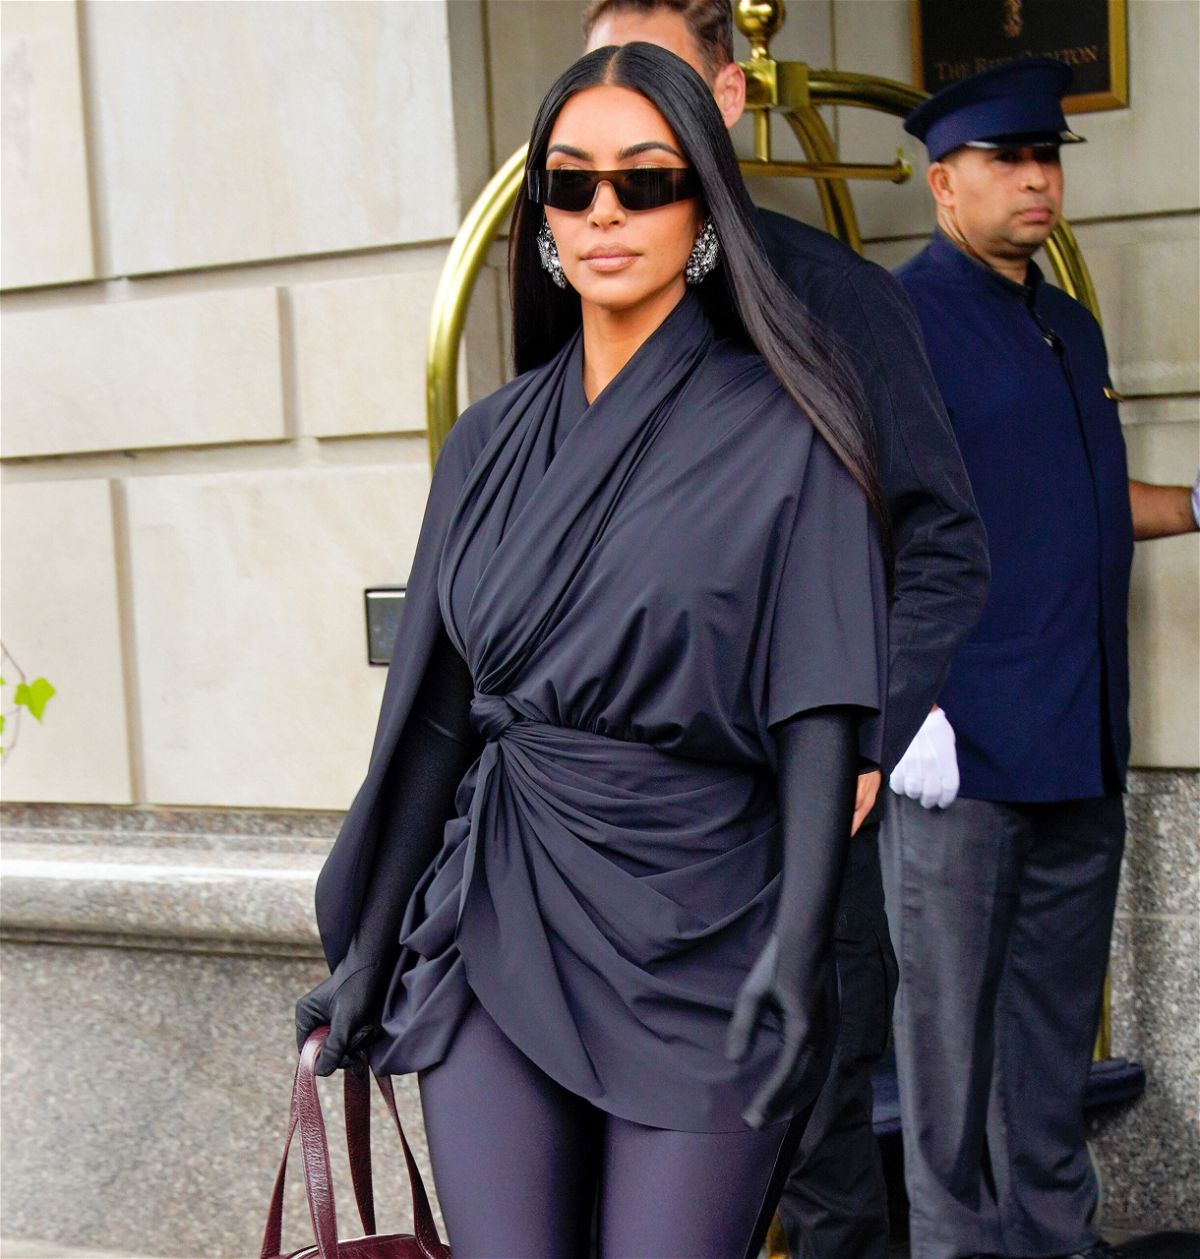 <i>Gotham/GC Images/Getty Images</i><br/>Kim Kardashian leaves her hotel en route to 'SNL' studios in New York this week.